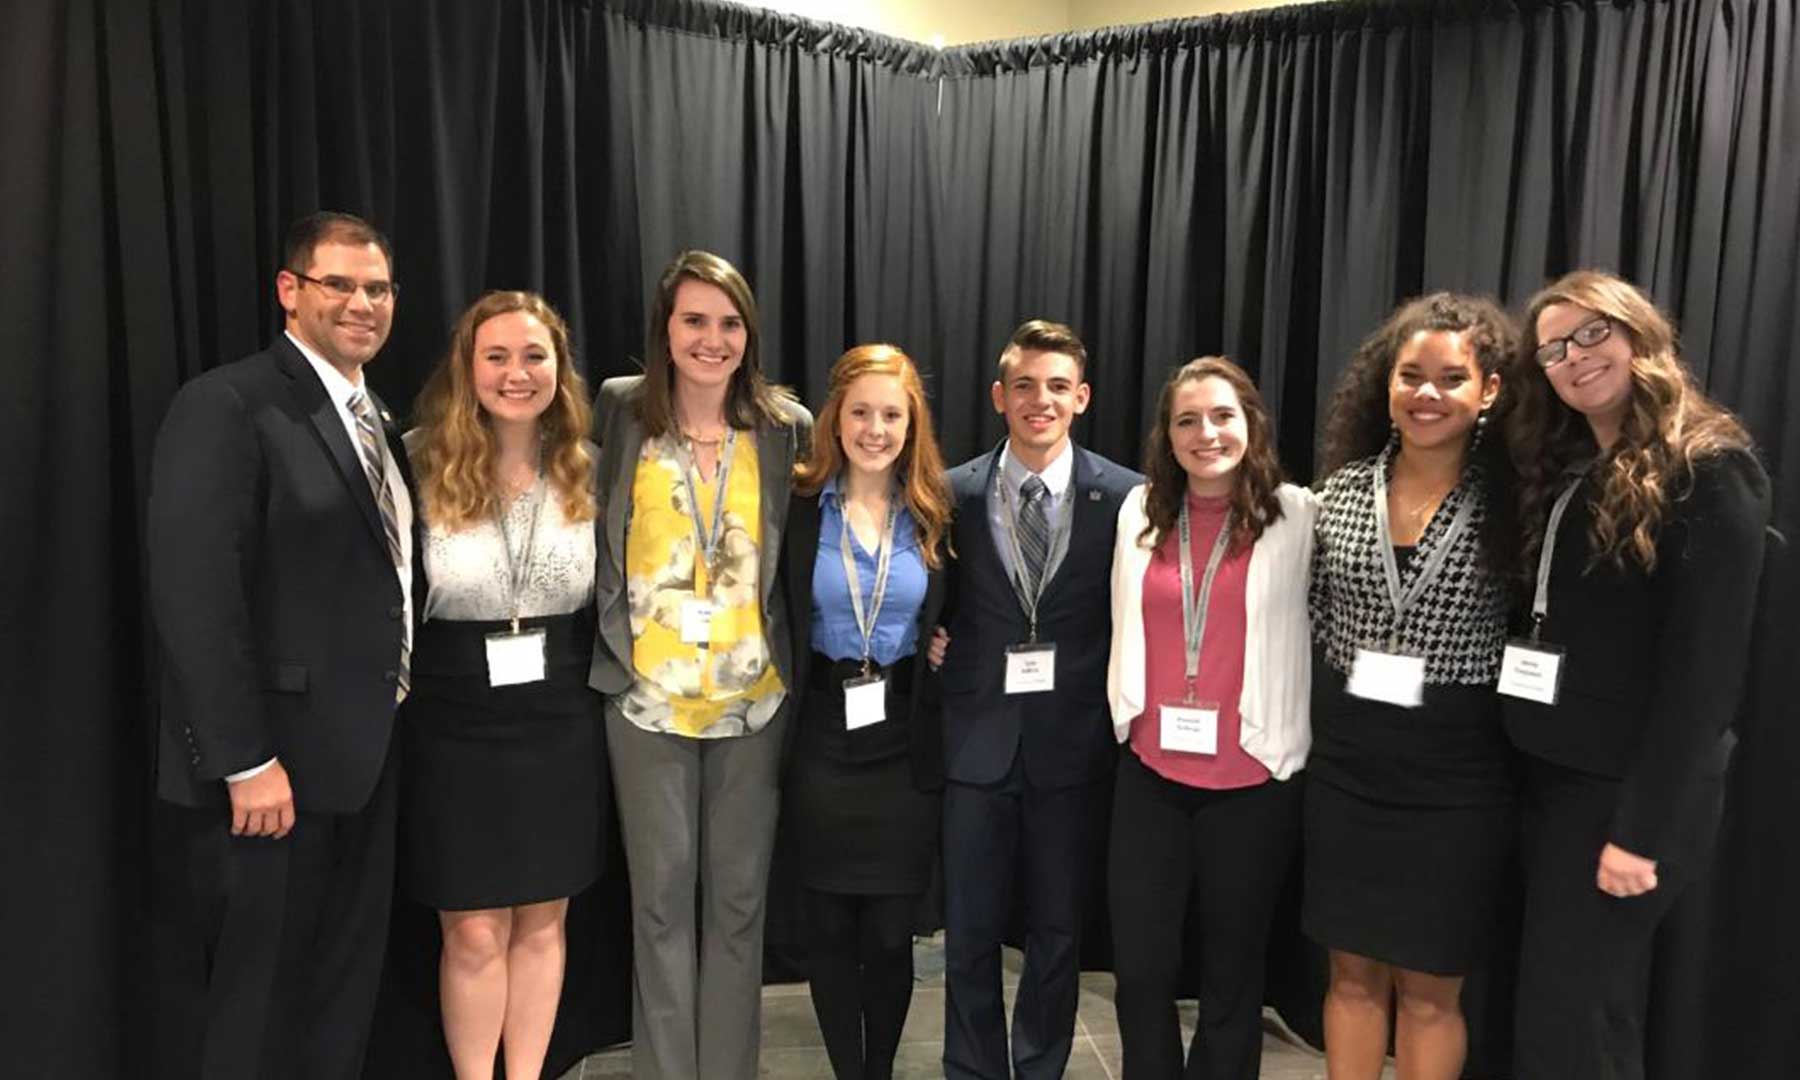 Sport and event management students network at a national conference.